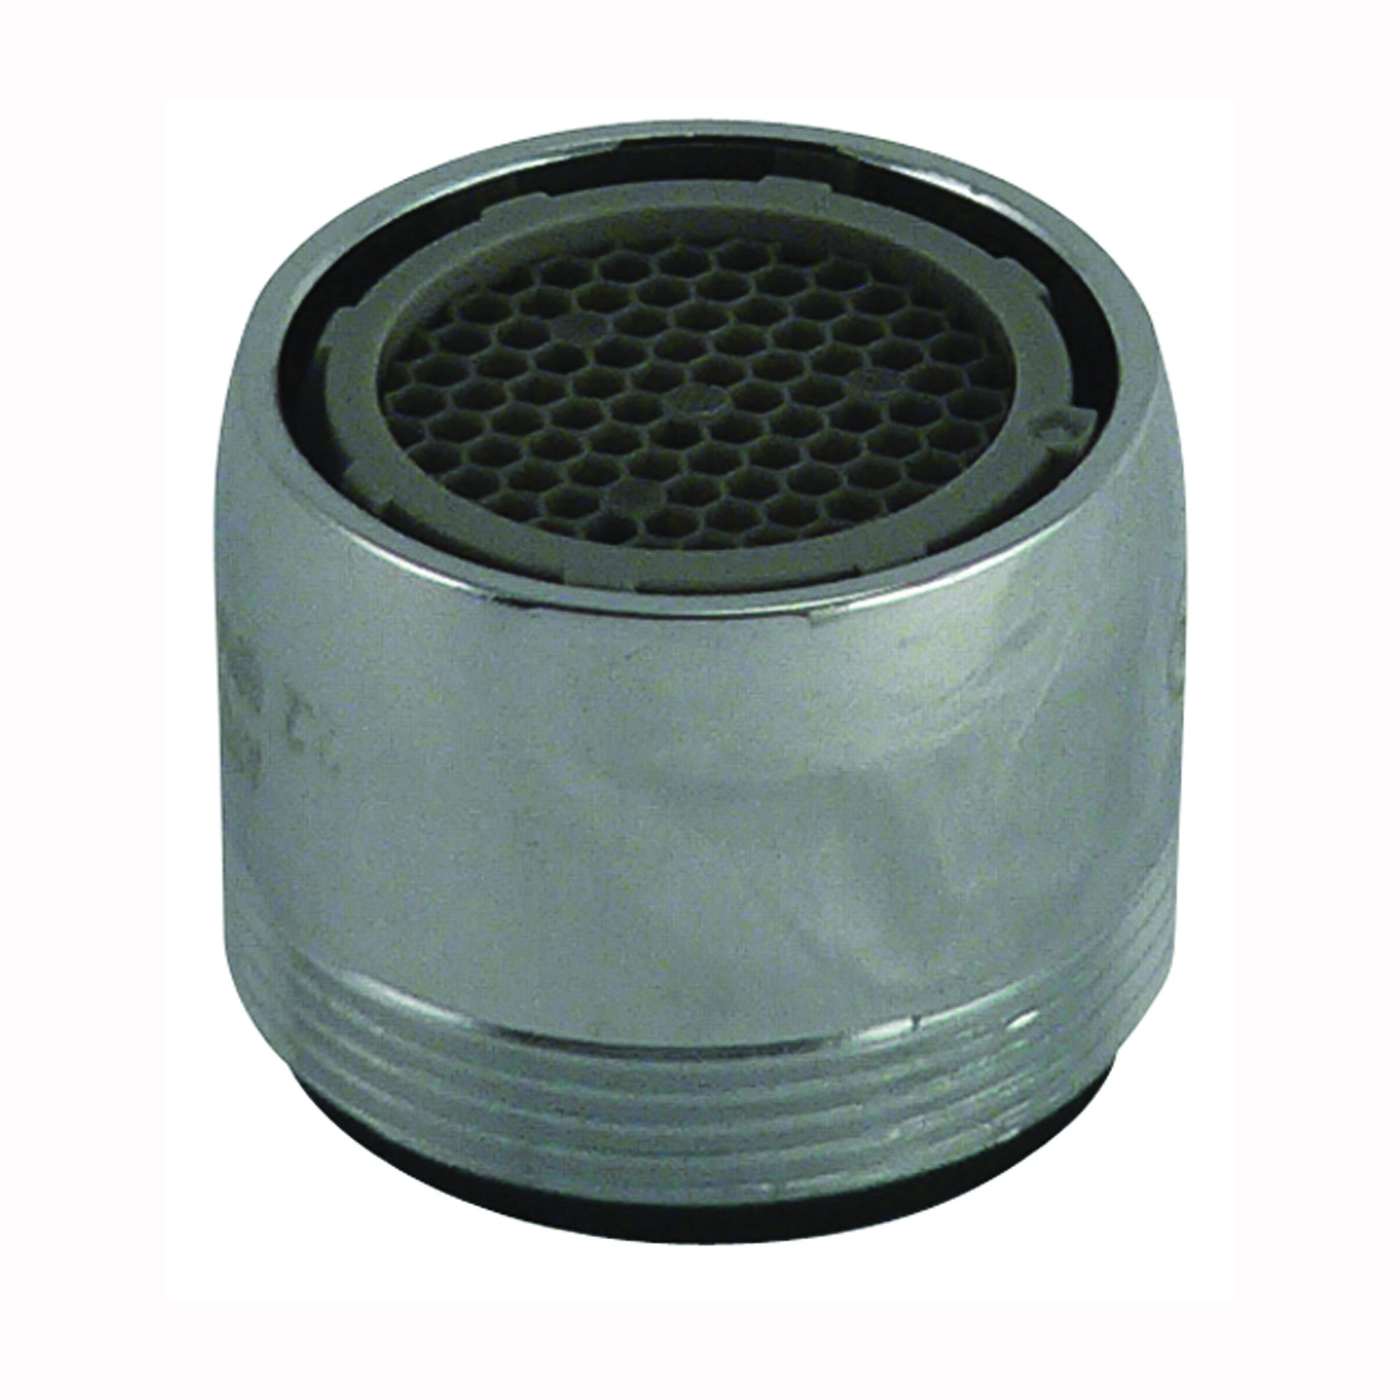 PP28002 Faucet Aerator, 15/16-27 x 55/64-27 Female, Chrome Plated